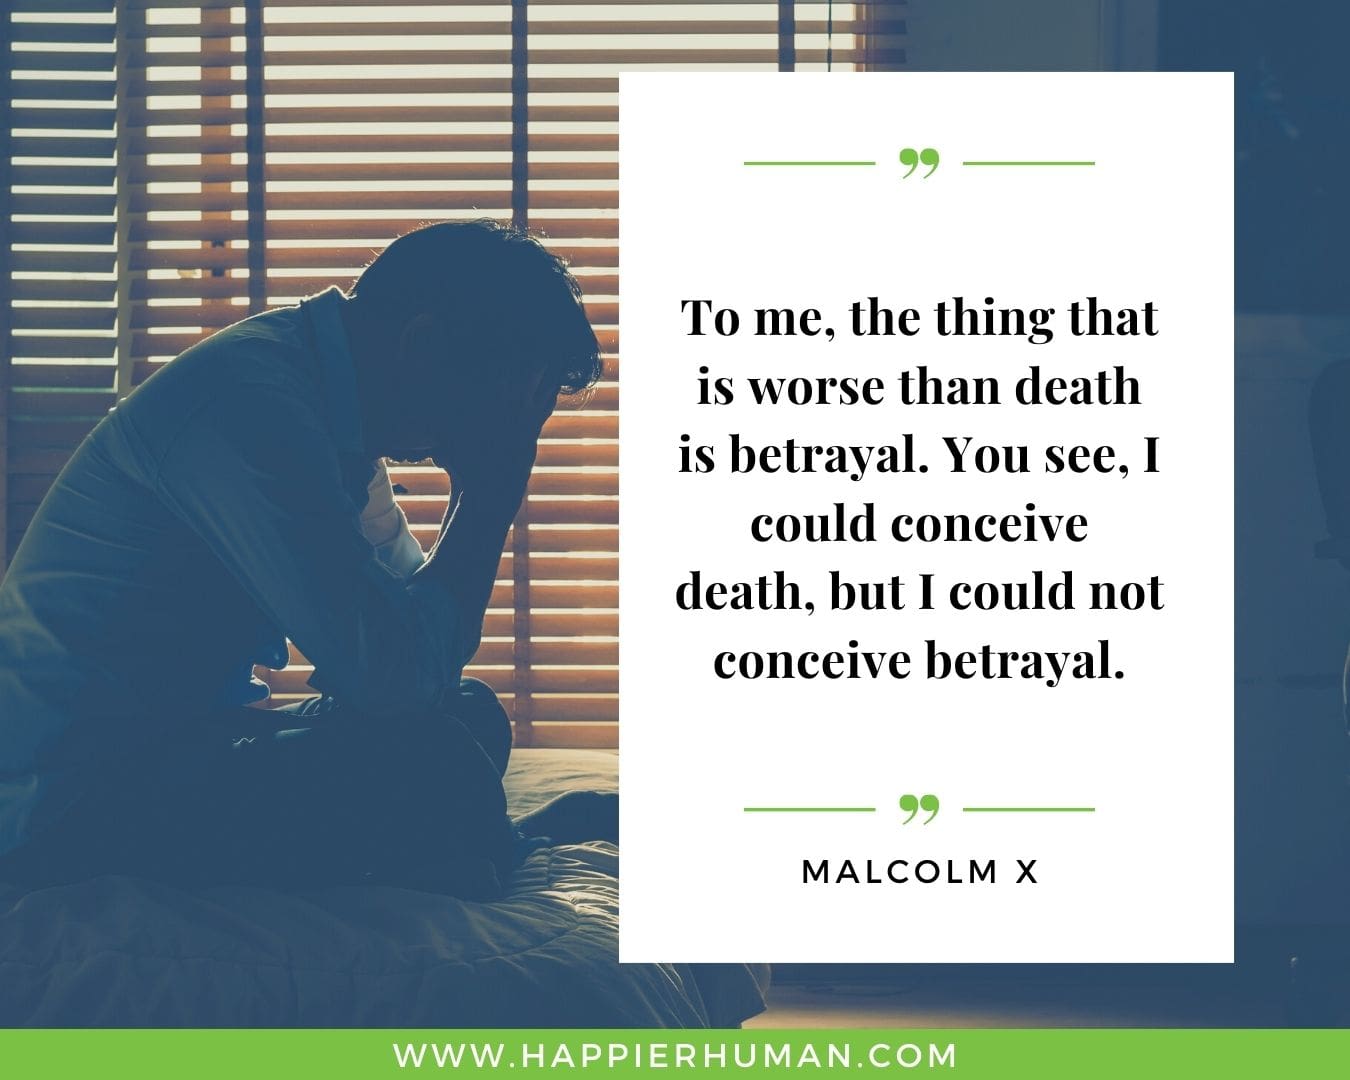 Broken Trust Quotes - “To me, the thing that is worse than death is betrayal. You see, I could conceive death, but I could not conceive betrayal.” - Malcolm X